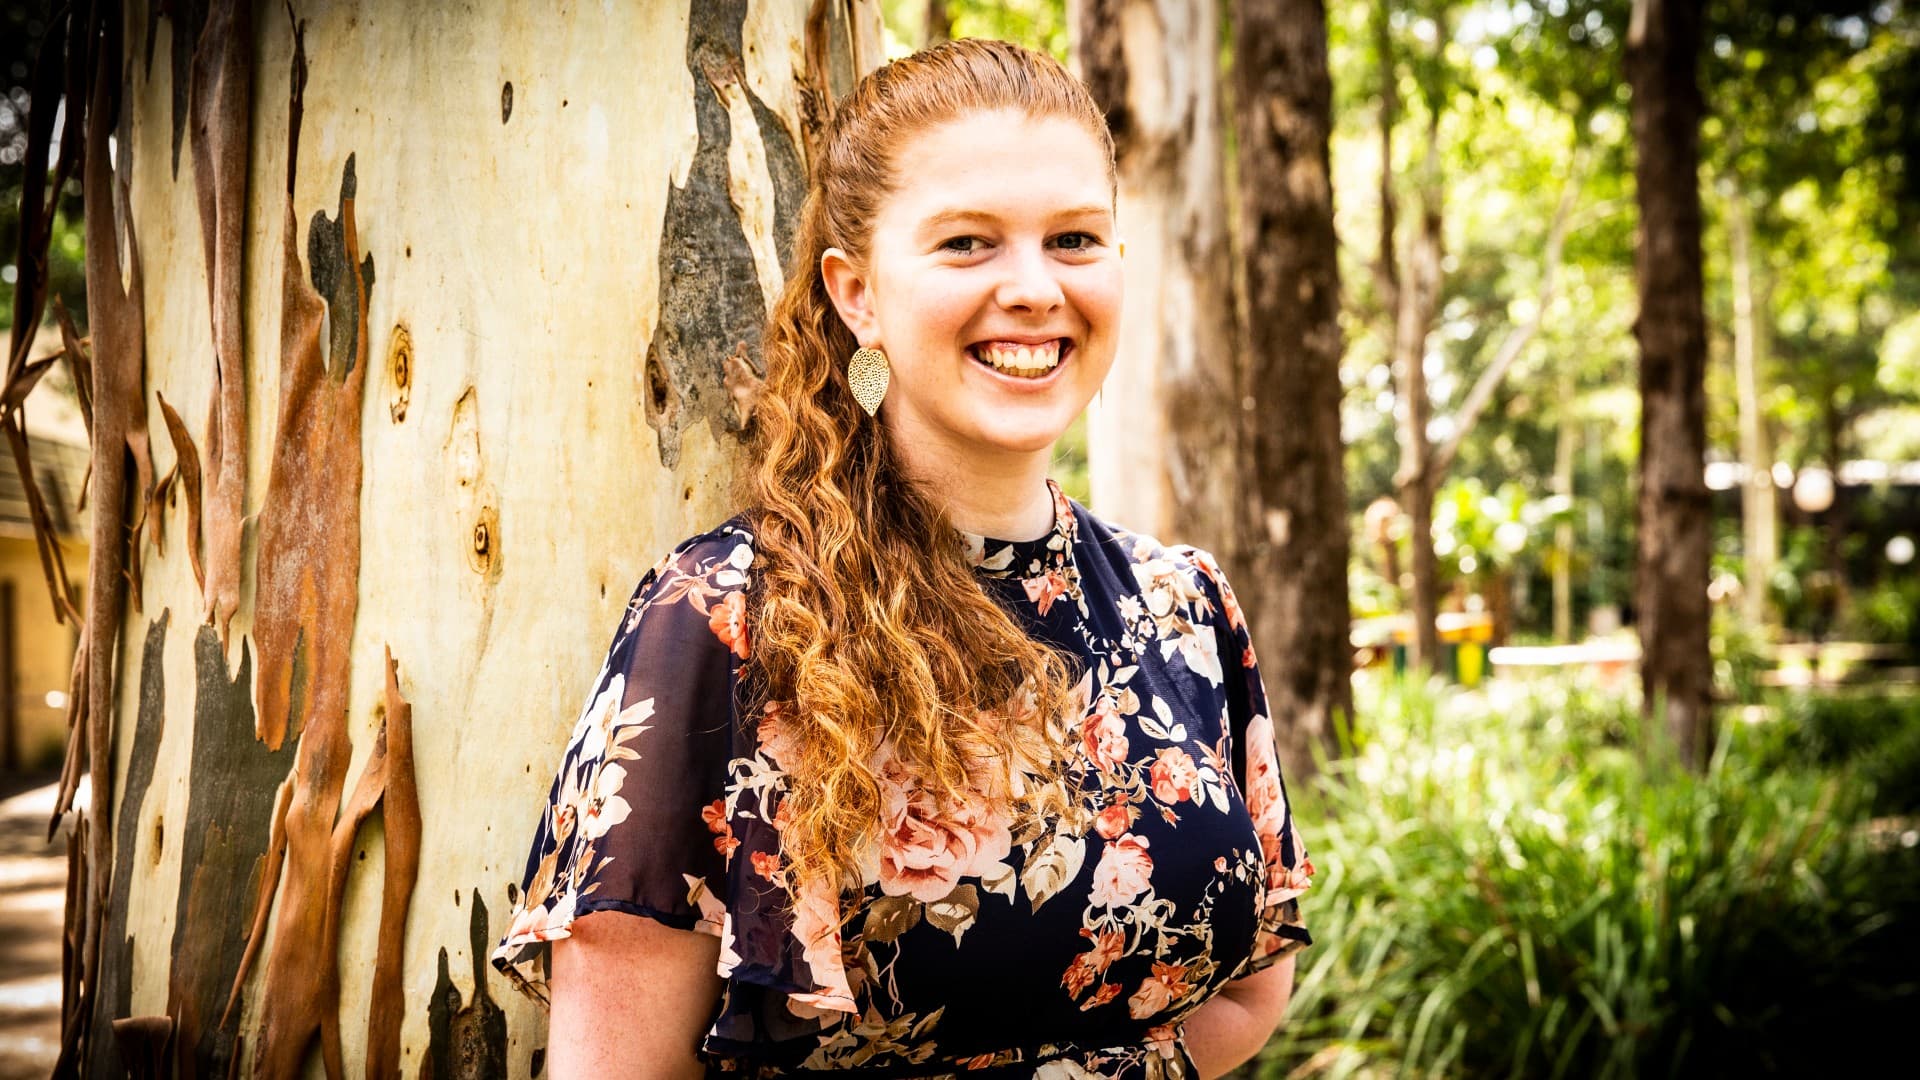 UOW graduate Meg Cummins, pictured standing against a tree at UOW's Wollongong campus. Photo: Paul Jones